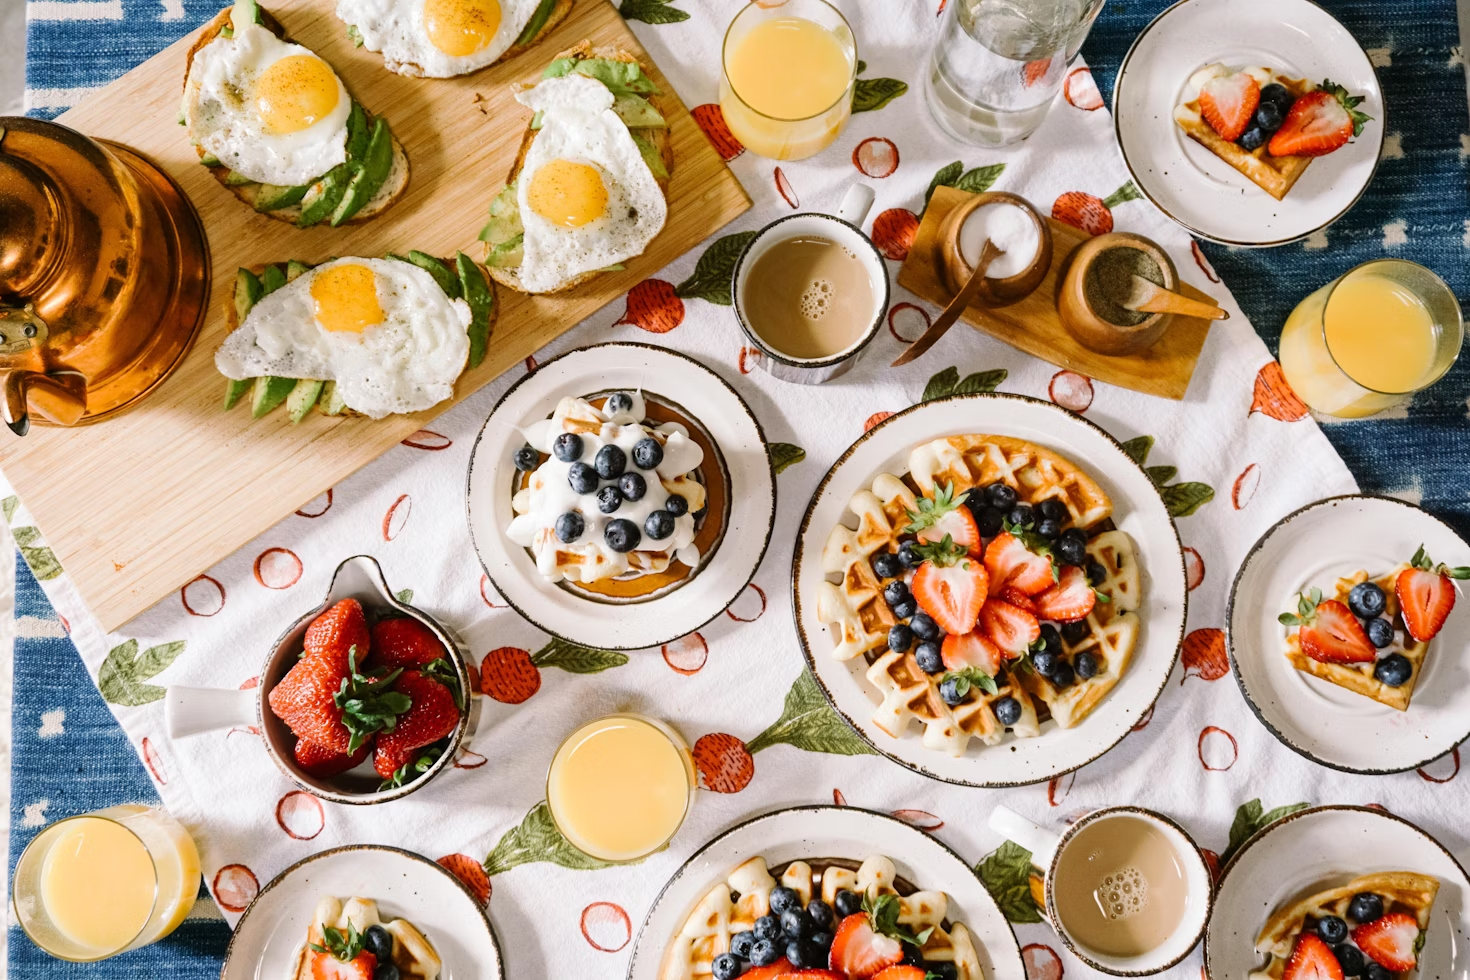 What Is The Most Popular Breakfast In Australia?